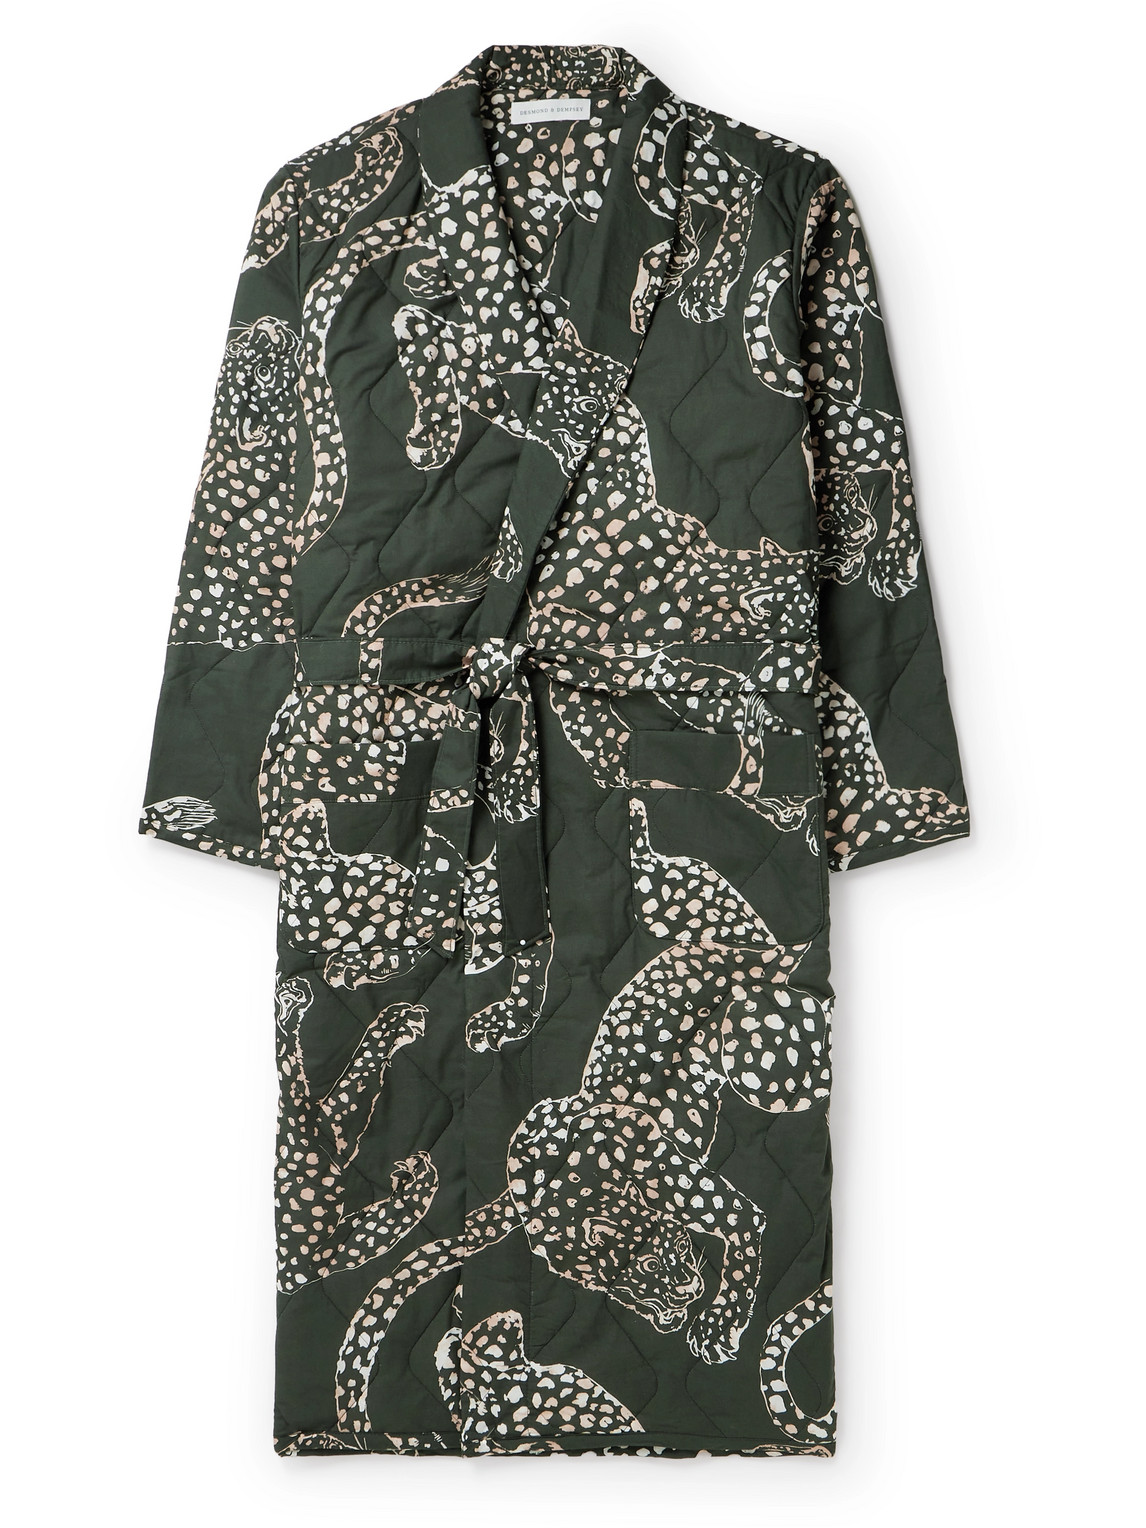 Quilted Printed Cotton Robe